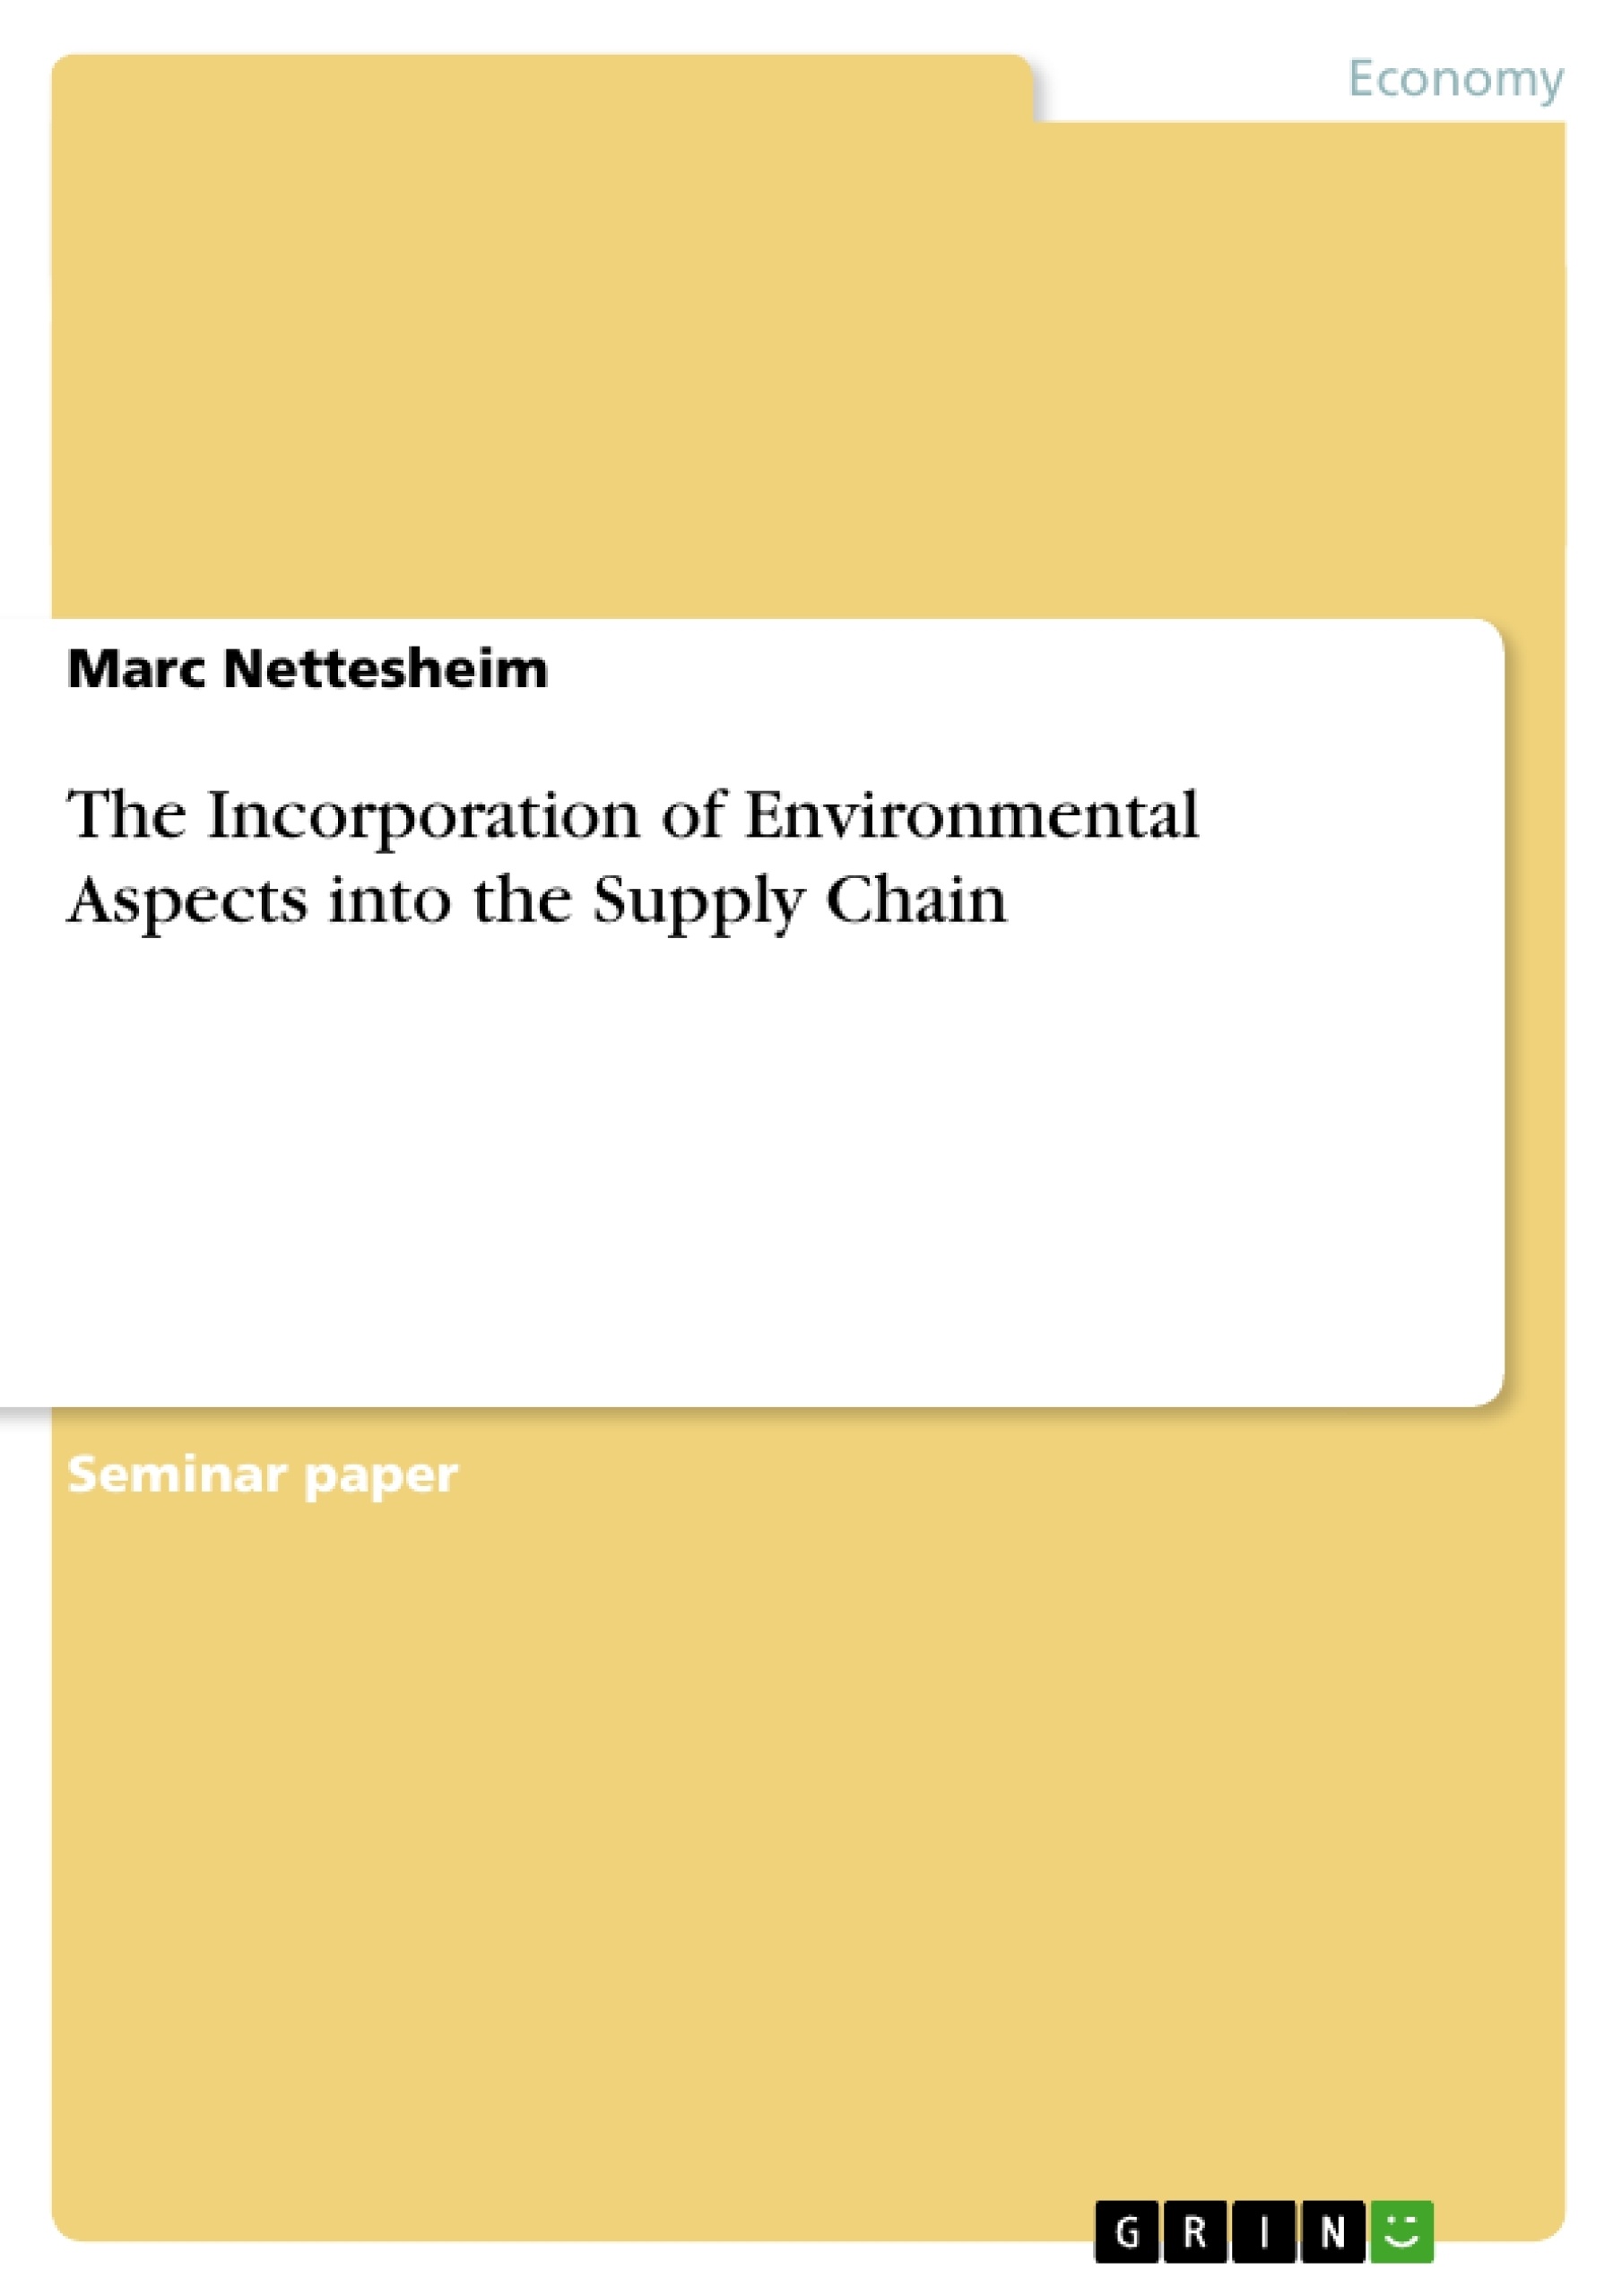 Title: The Incorporation of Environmental Aspects into the Supply Chain